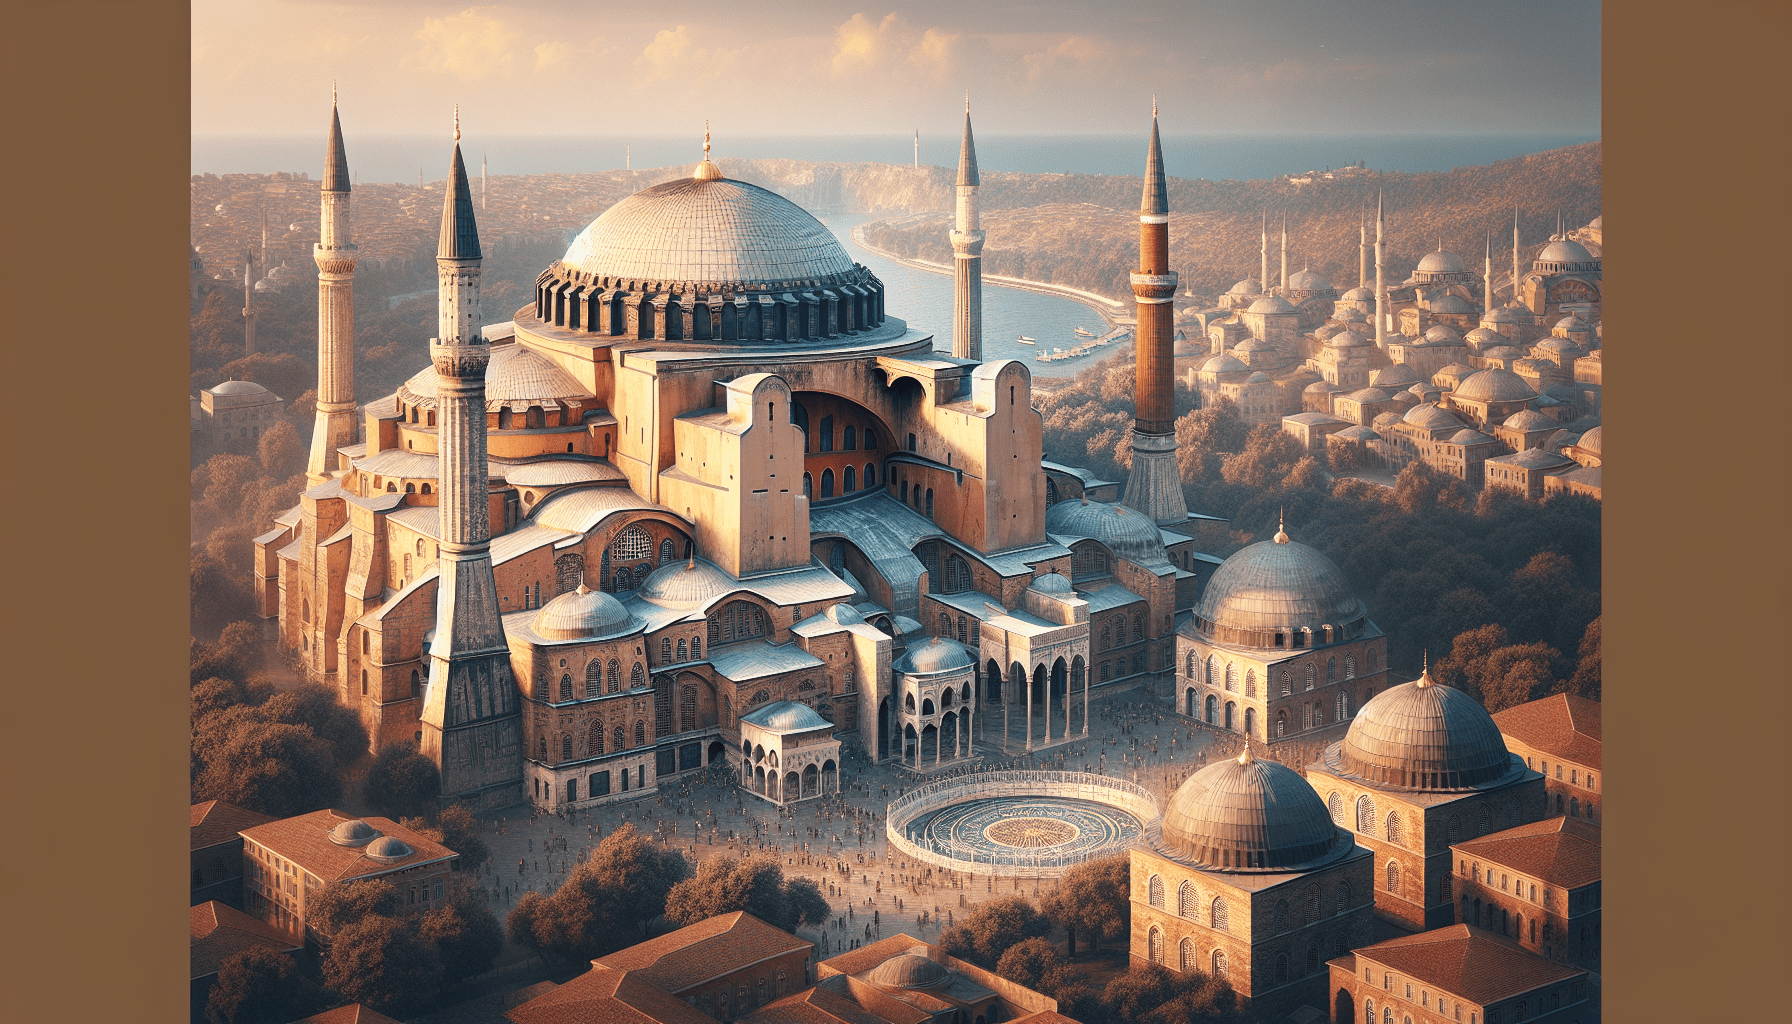 Aerial view of hagia sophia in istanbul during golden hour, highlighting its large dome and surrounding minarets.